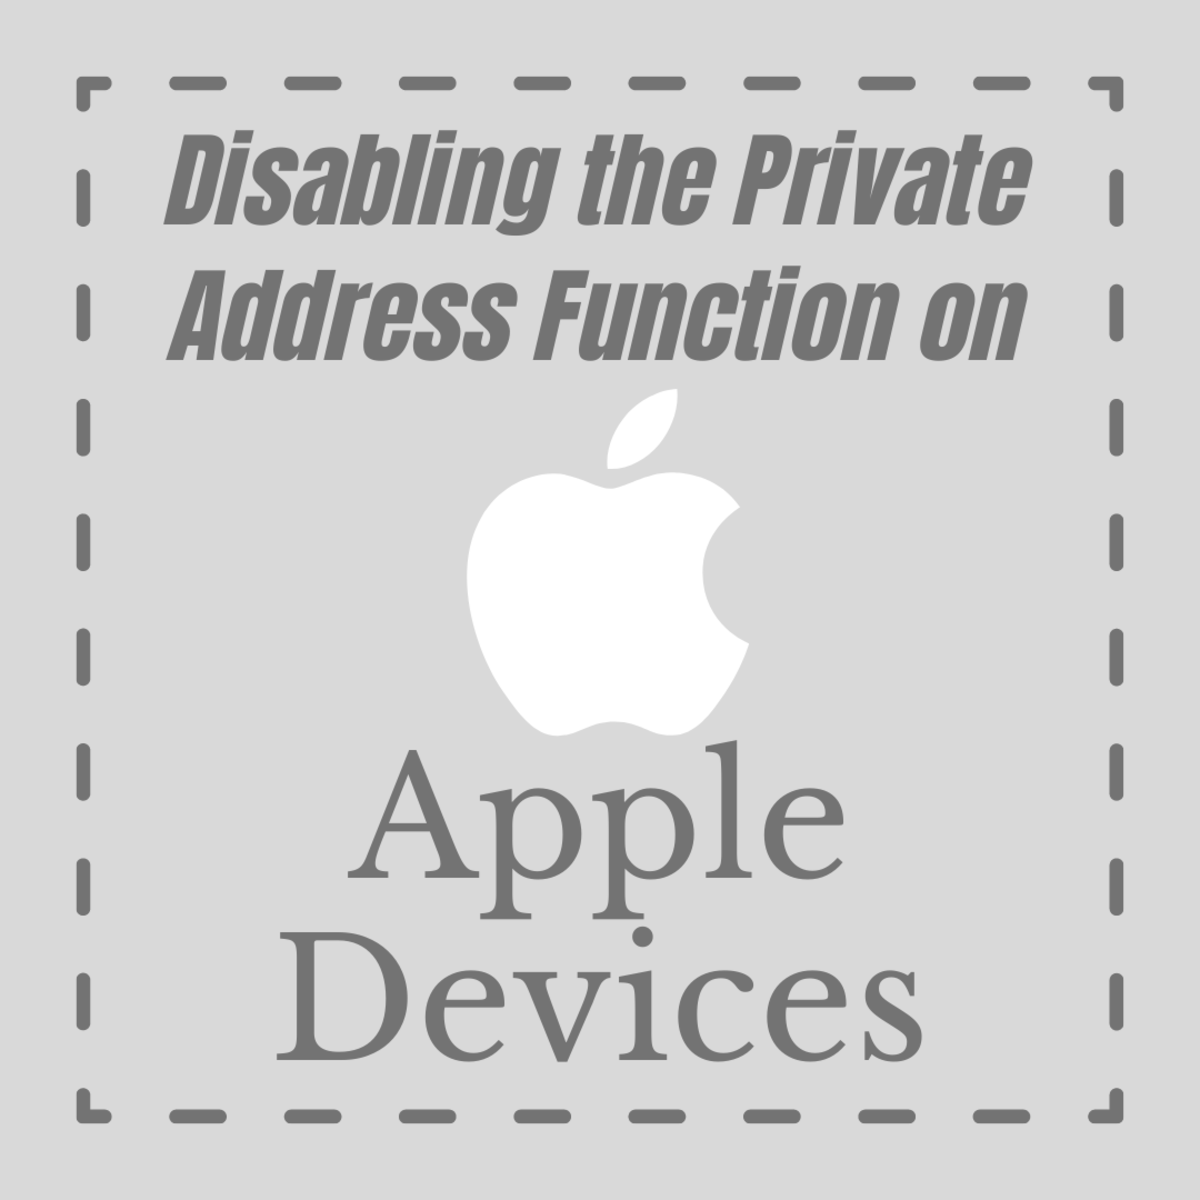 Learn how to disable the private address feature on Mac devices